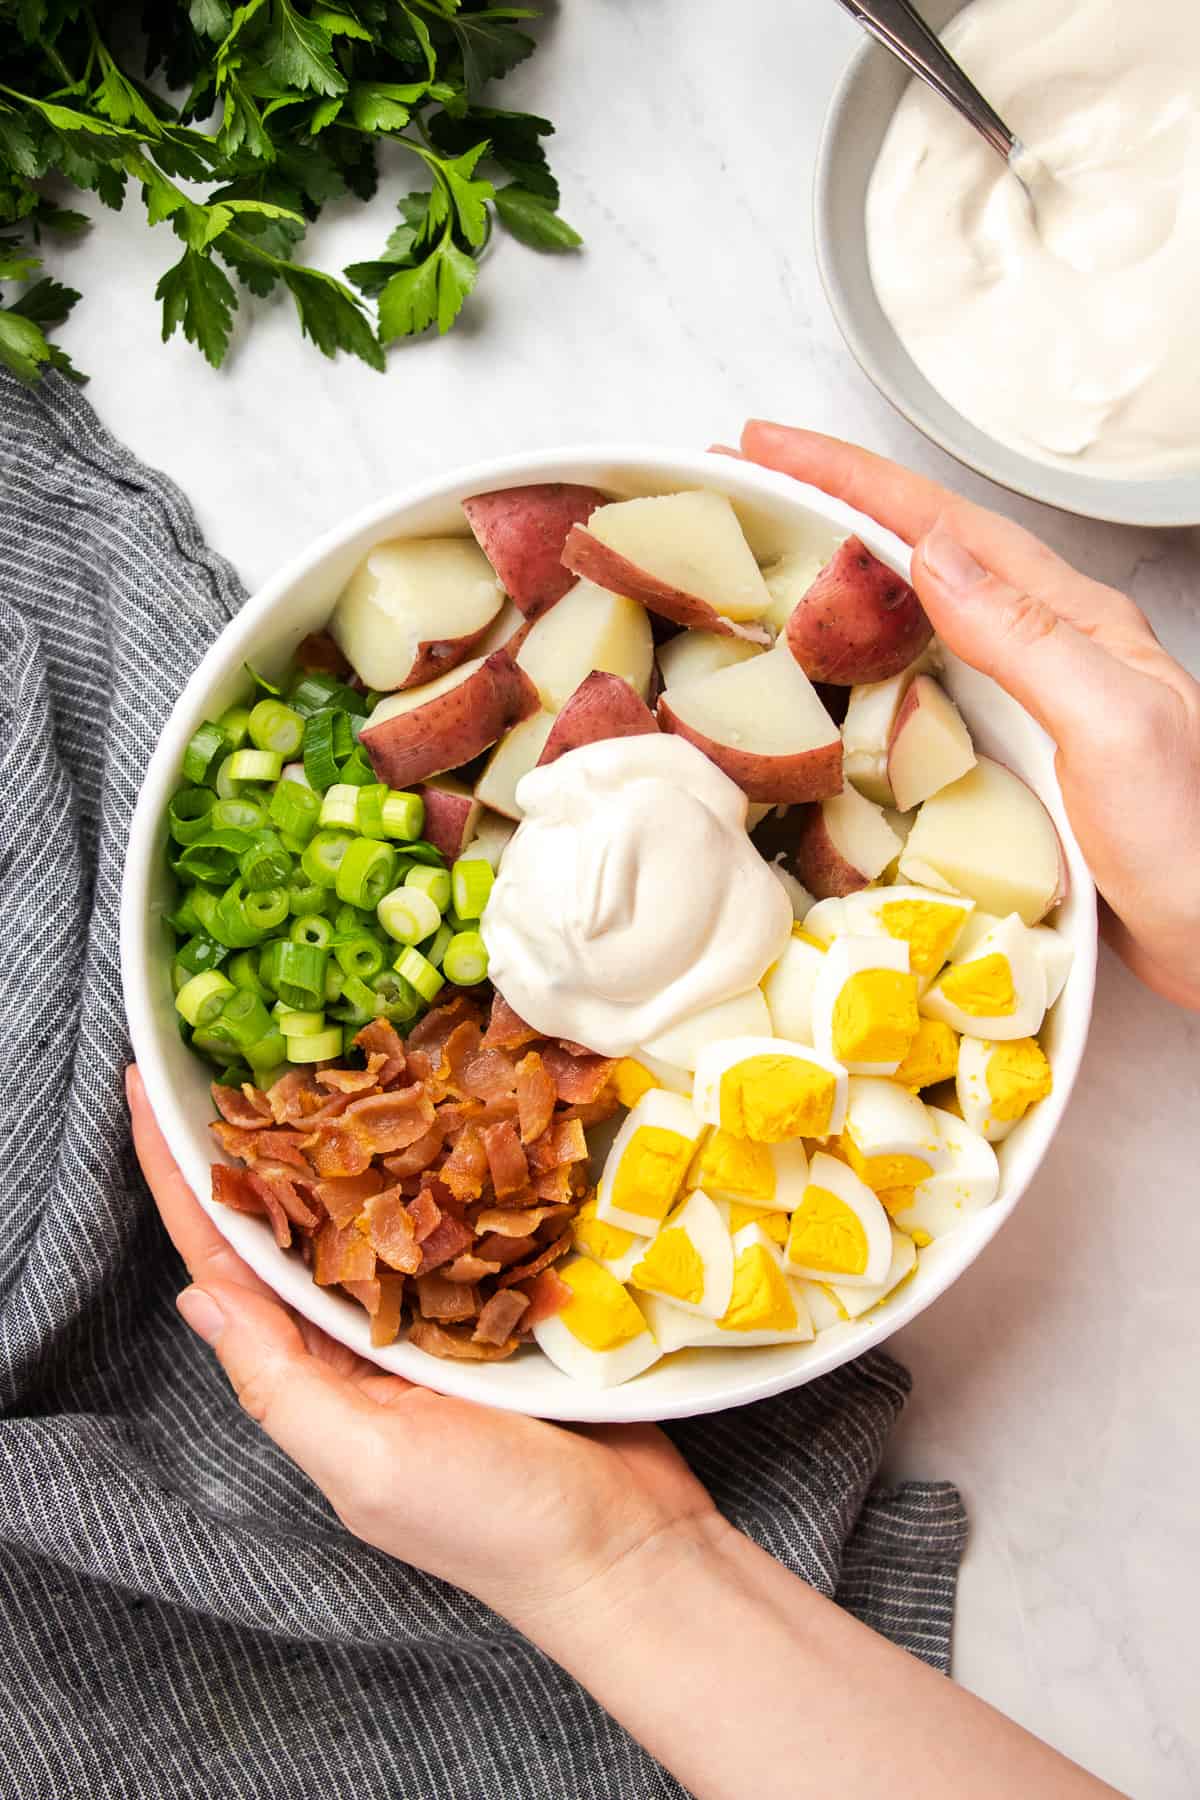 diced Red potatoes, eggs, bacon, green onion, and dressing in a white bowl.